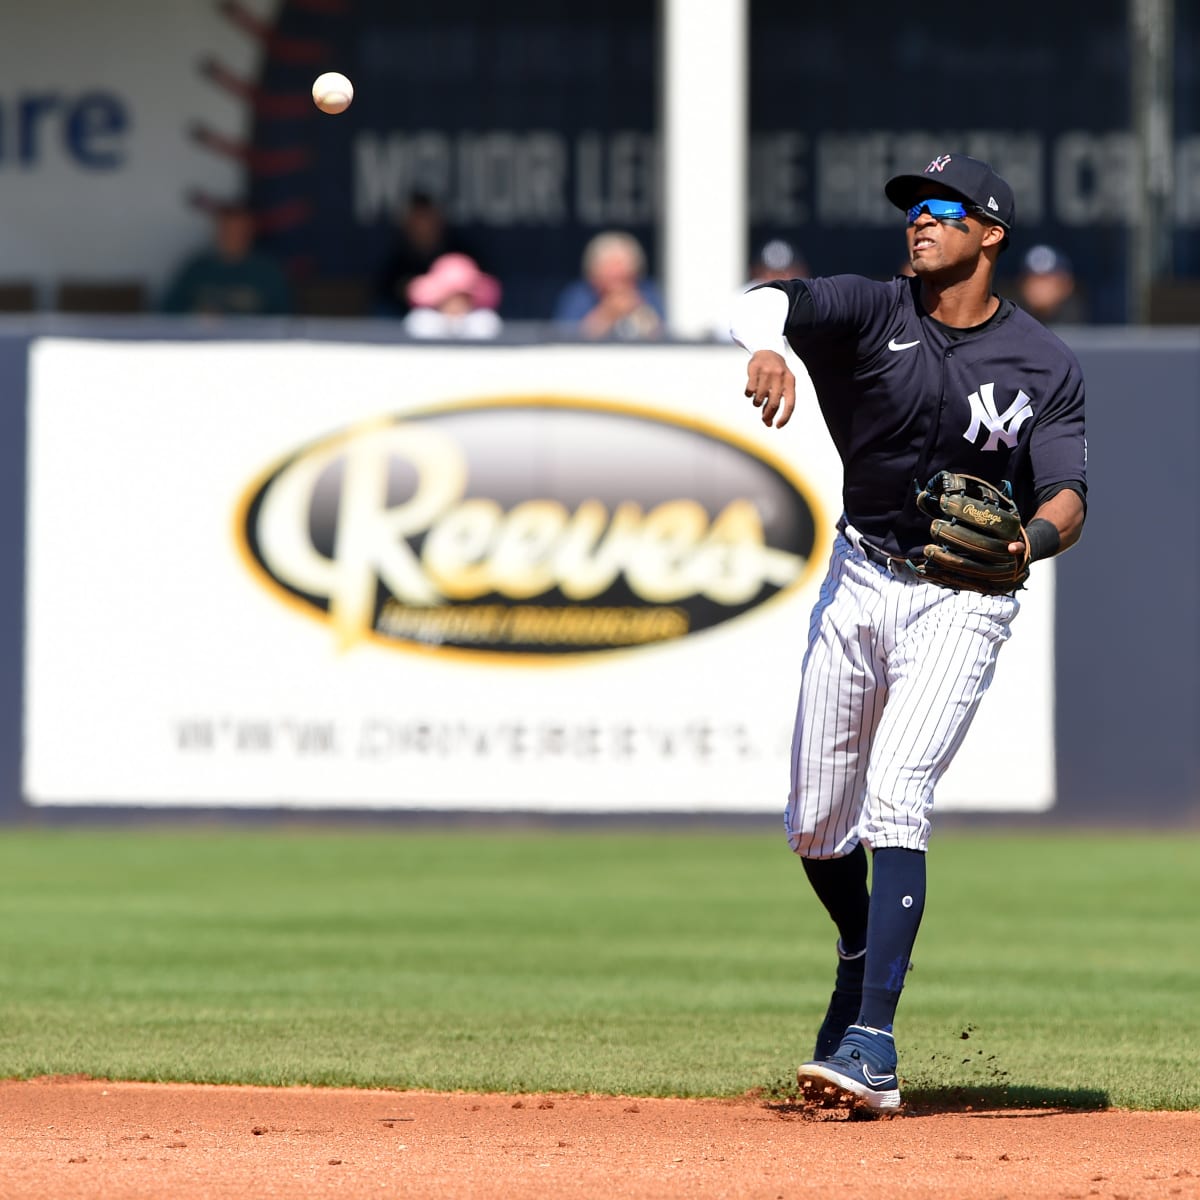 Yankees spring training 2023: Roster surprises, stats in camp